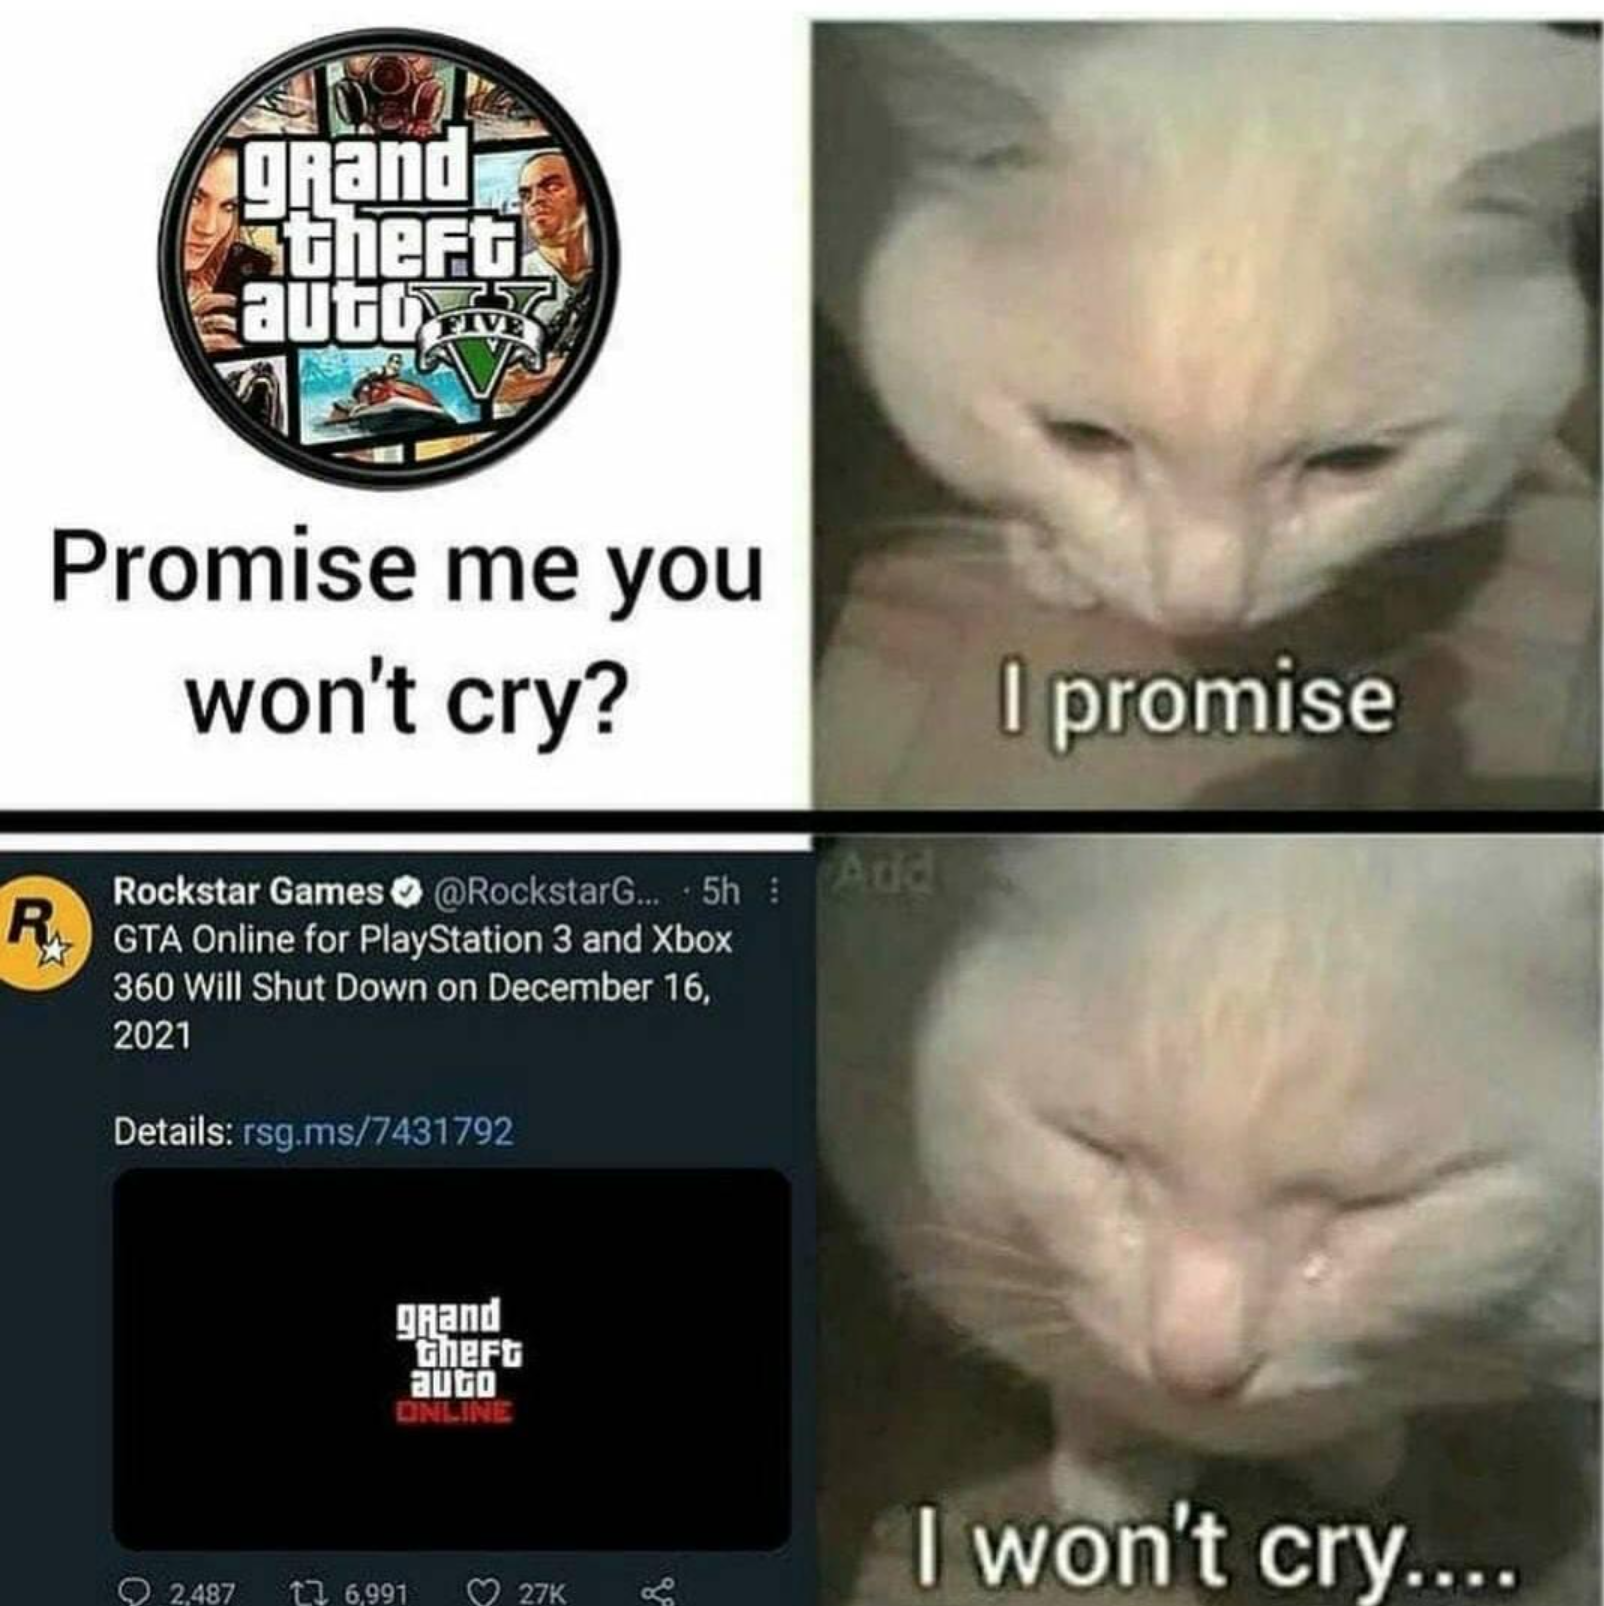 keanu reeves promise you won t cry - grandi Stheft auto, Promise me you won't cry? I promise Rockstar Games . 5h R Gta Online for PlayStation 3 and Xbox 360 Will Shut Down on Details rsg.ms7431792 grand Cheft auto Deline I won't cry.... 2,487